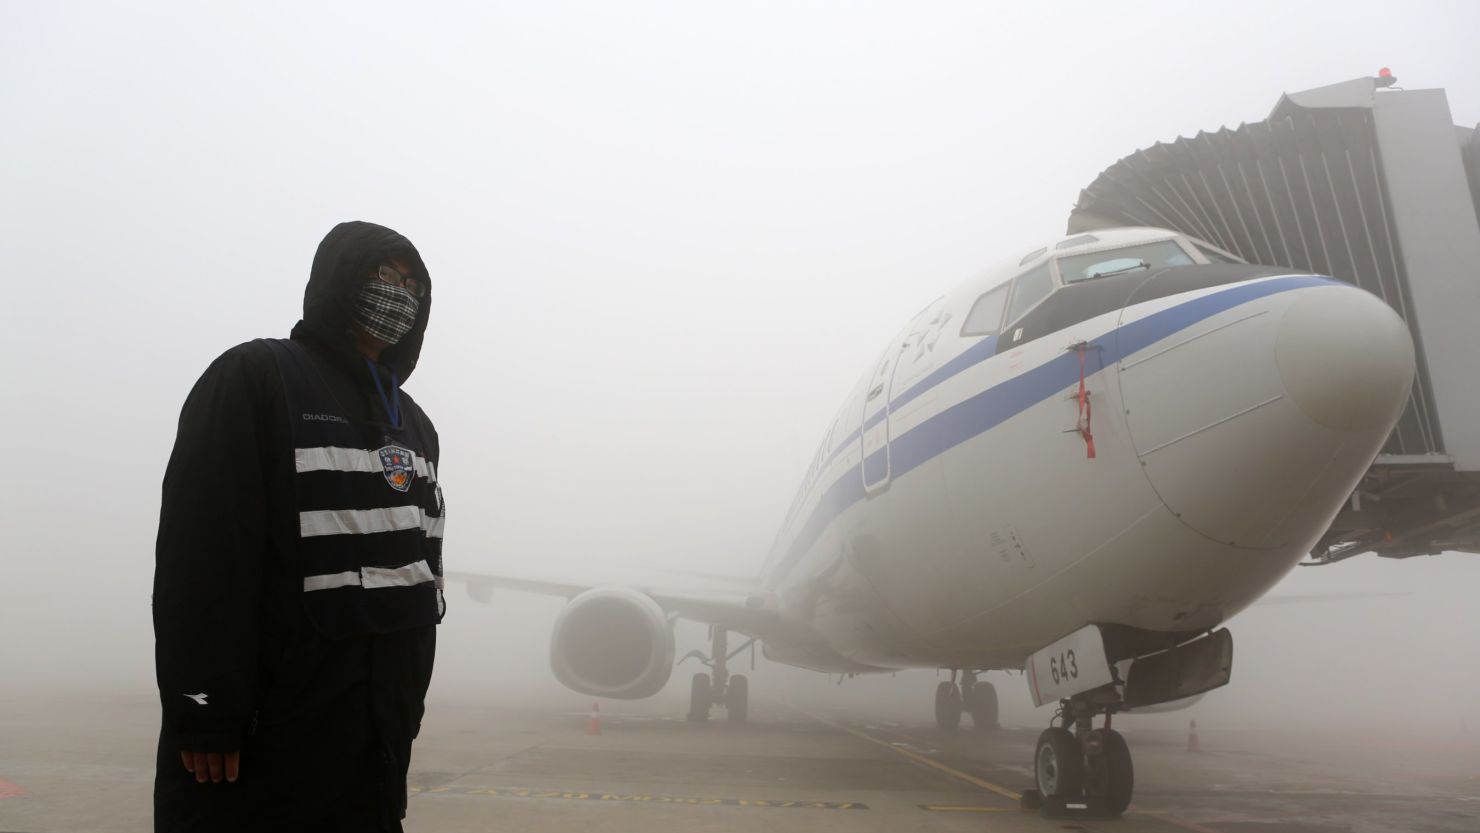 A man stands next to an airplane in heavy smog in Harbin, northeast China's Heilongjiang province, on October 21, 2013. 